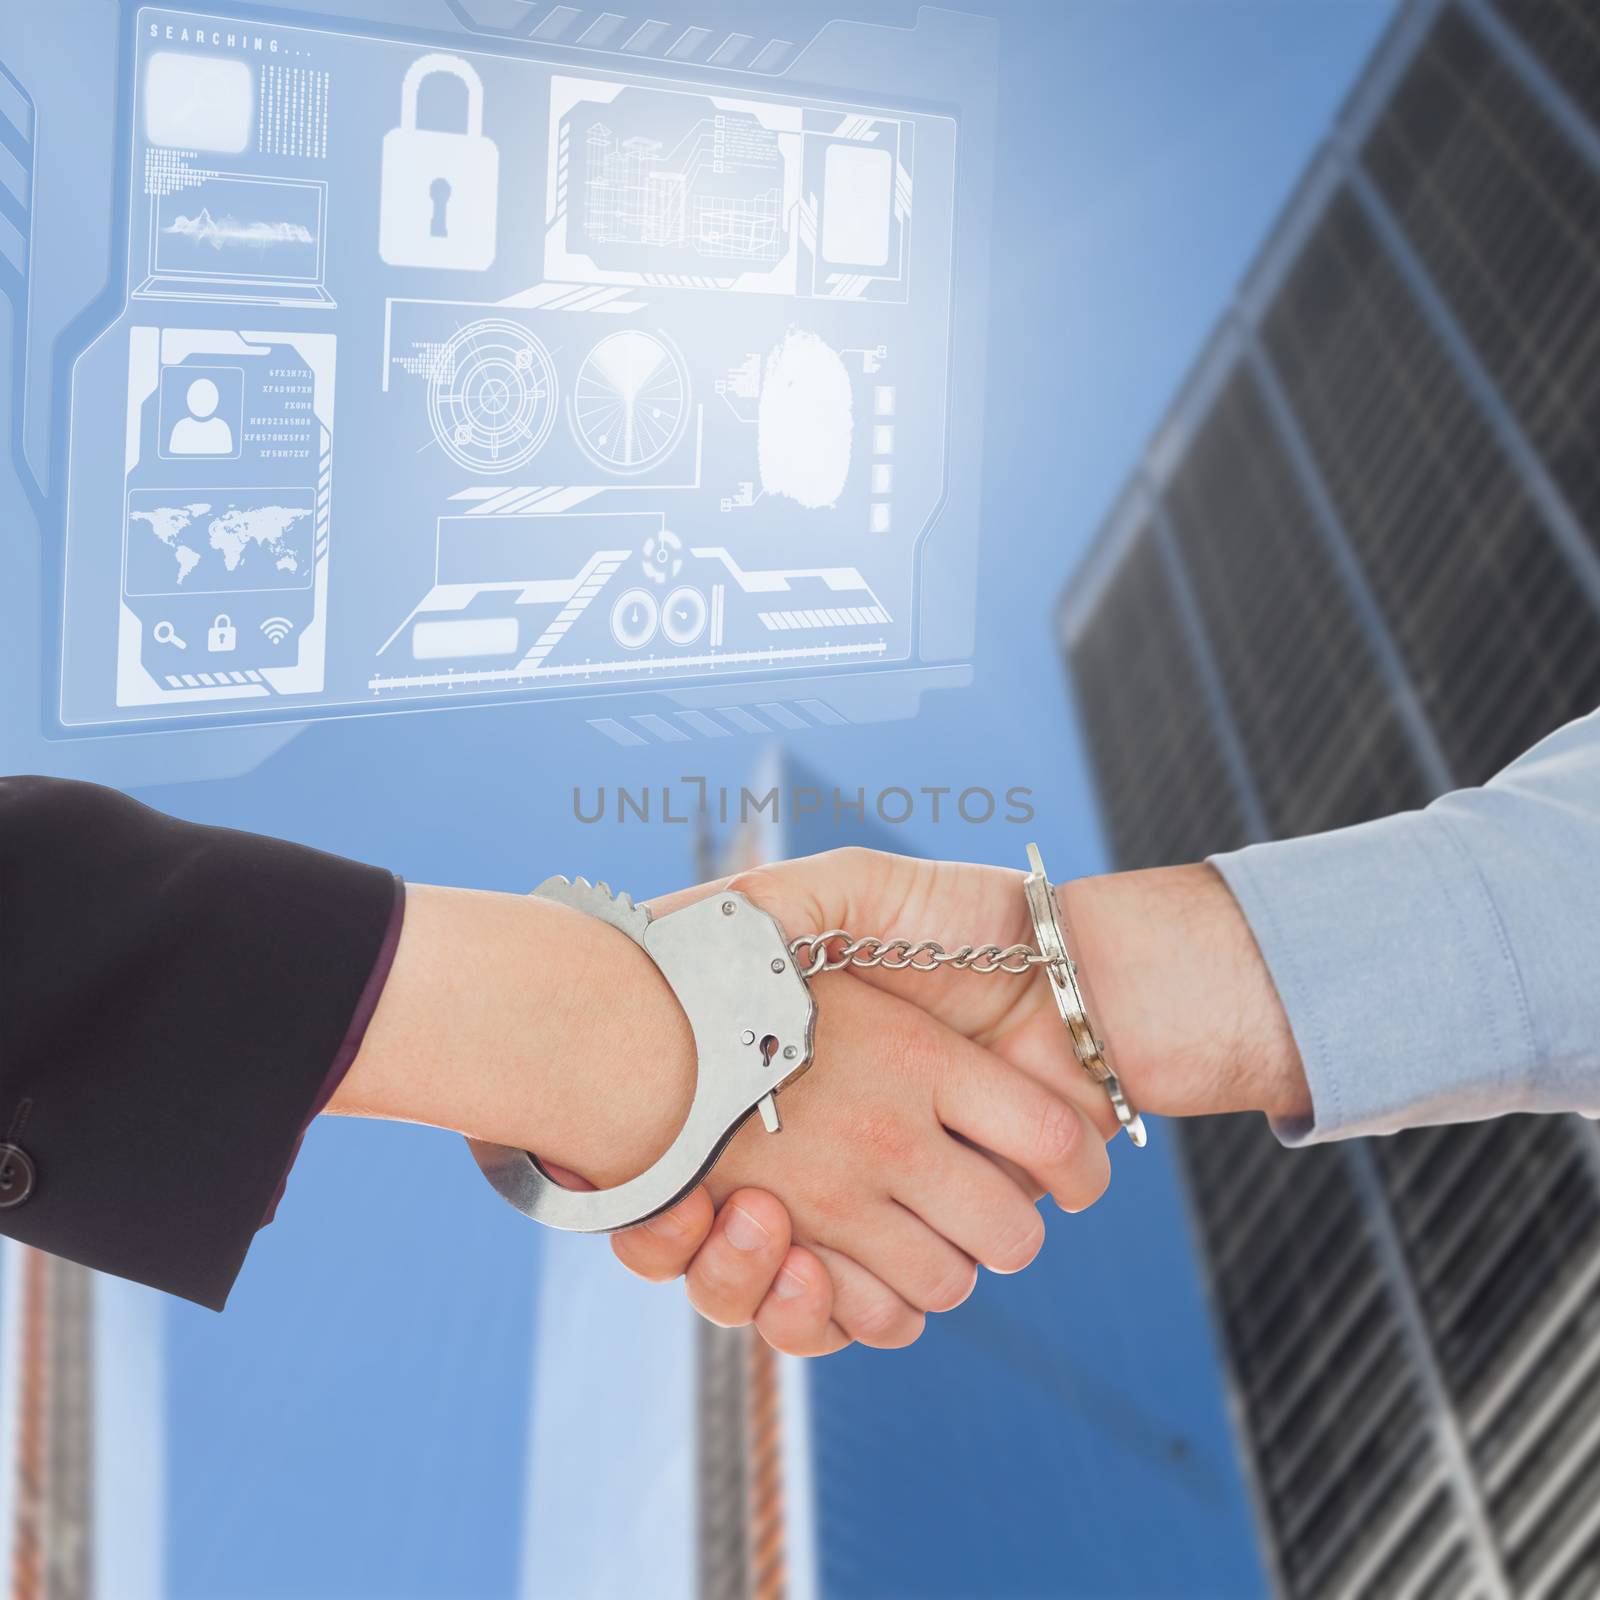 Business people in handcuffs shaking hands against skyscrapers